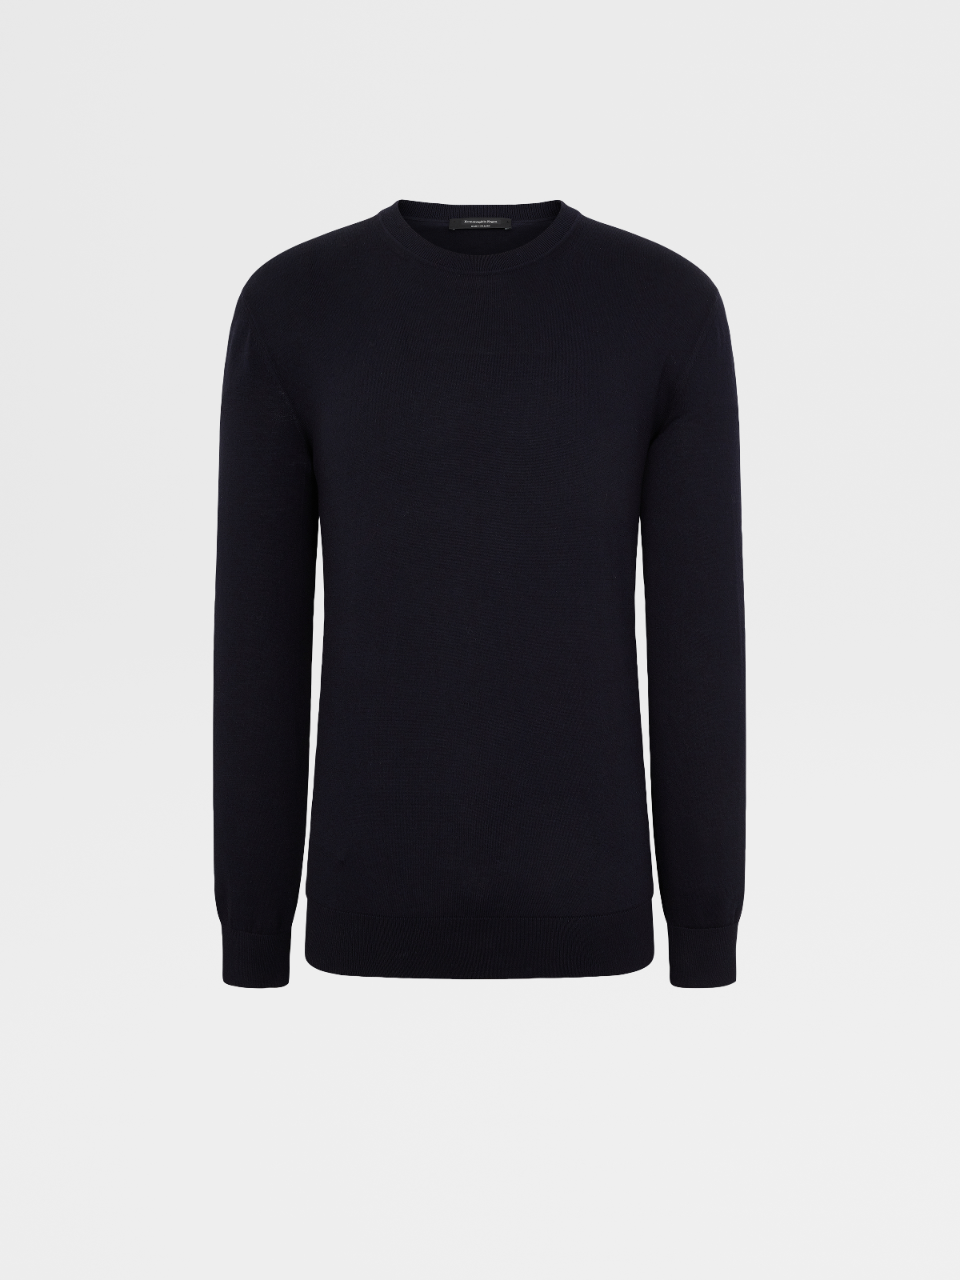 Navy Blue Baby Island Cotton and Cashmere Knit Crewneck